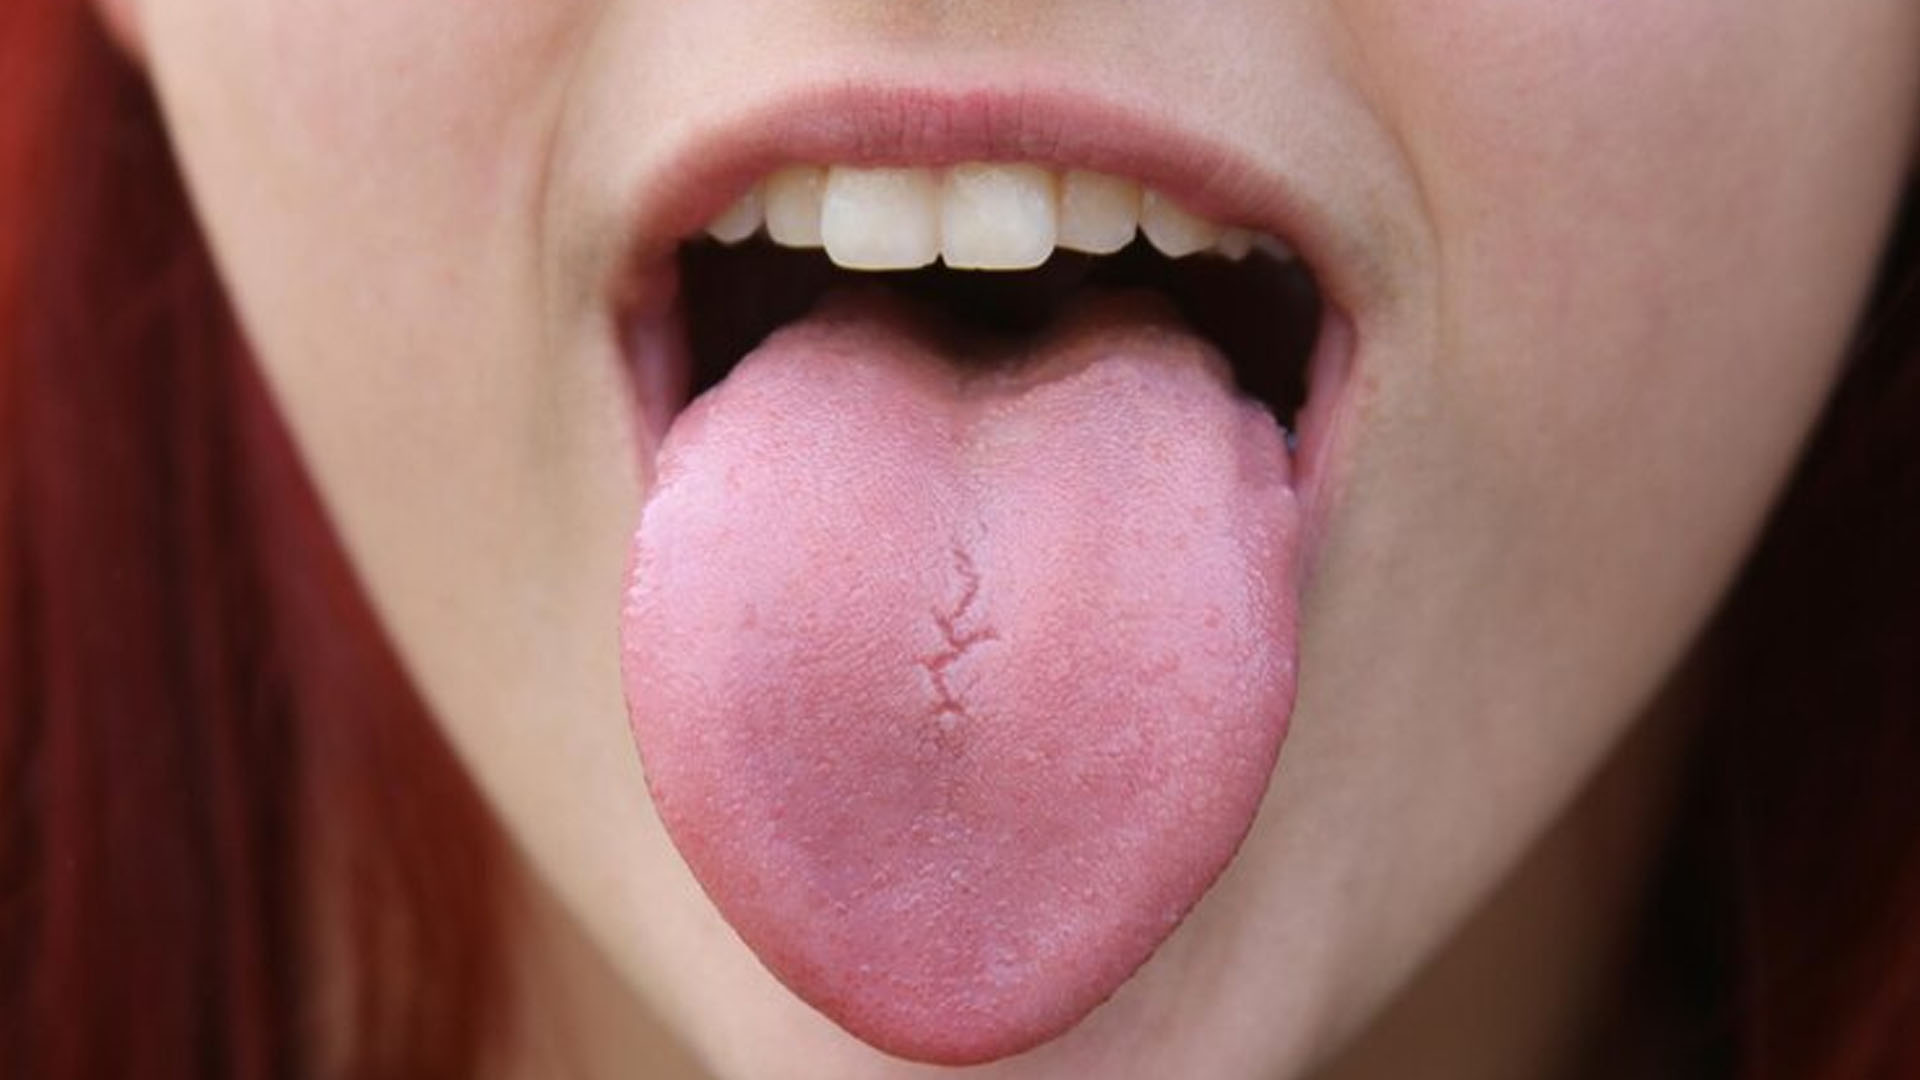 What are the Home Remedies for Tongue Cracks?